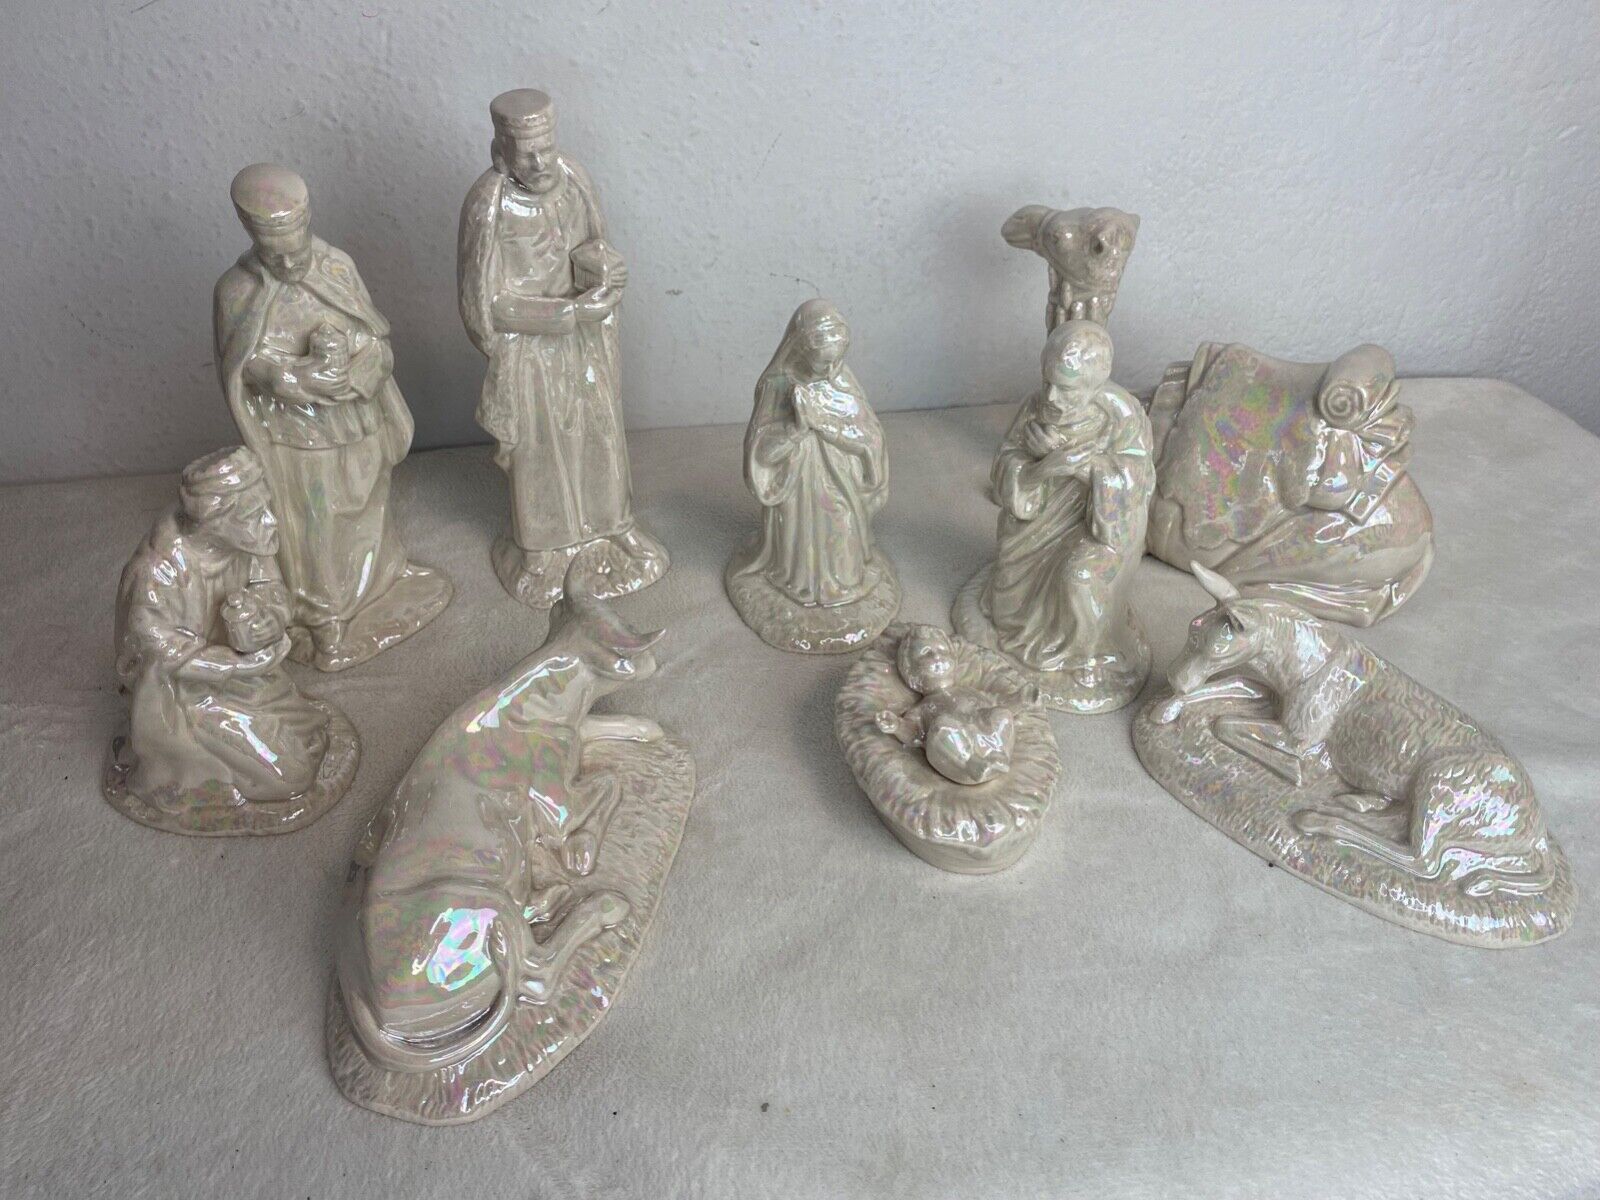 Vintage Glazed Mother of Pearl look Ceramic Nativity Set 9 Pieces/Figurines 1985